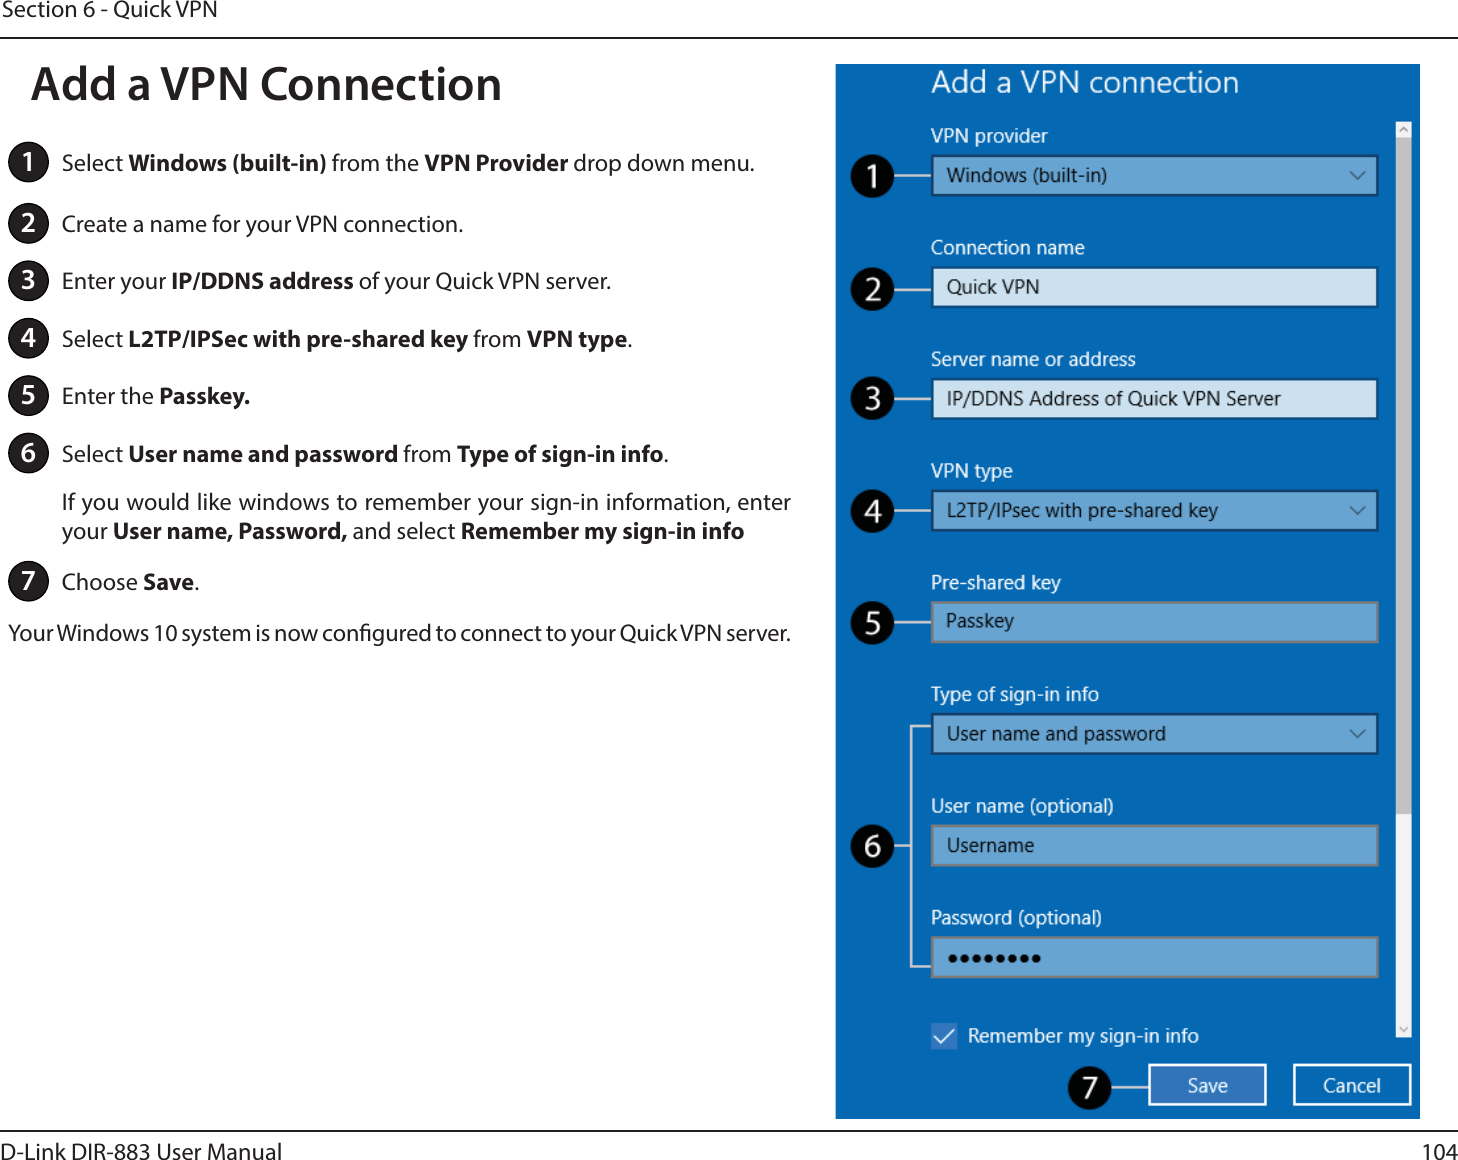 104D-Link DIR-883 User ManualSection 6 - Quick VPN1Select Windows (built-in) from the VPN Provider drop down menu.2Create a name for your VPN connection.3Enter your IP/DDNS address of your Quick VPN server.4Select L2TP/IPSec with pre-shared key from VPN type.5Enter the Passkey.6Select User name and password from Type of sign-in info.If you would like windows to remember your sign-in information, enter your User name, Password, and select Remember my sign-in info7Choose Save.Your Windows 10 system is now congured to connect to your Quick VPN server.Add a VPN Connection